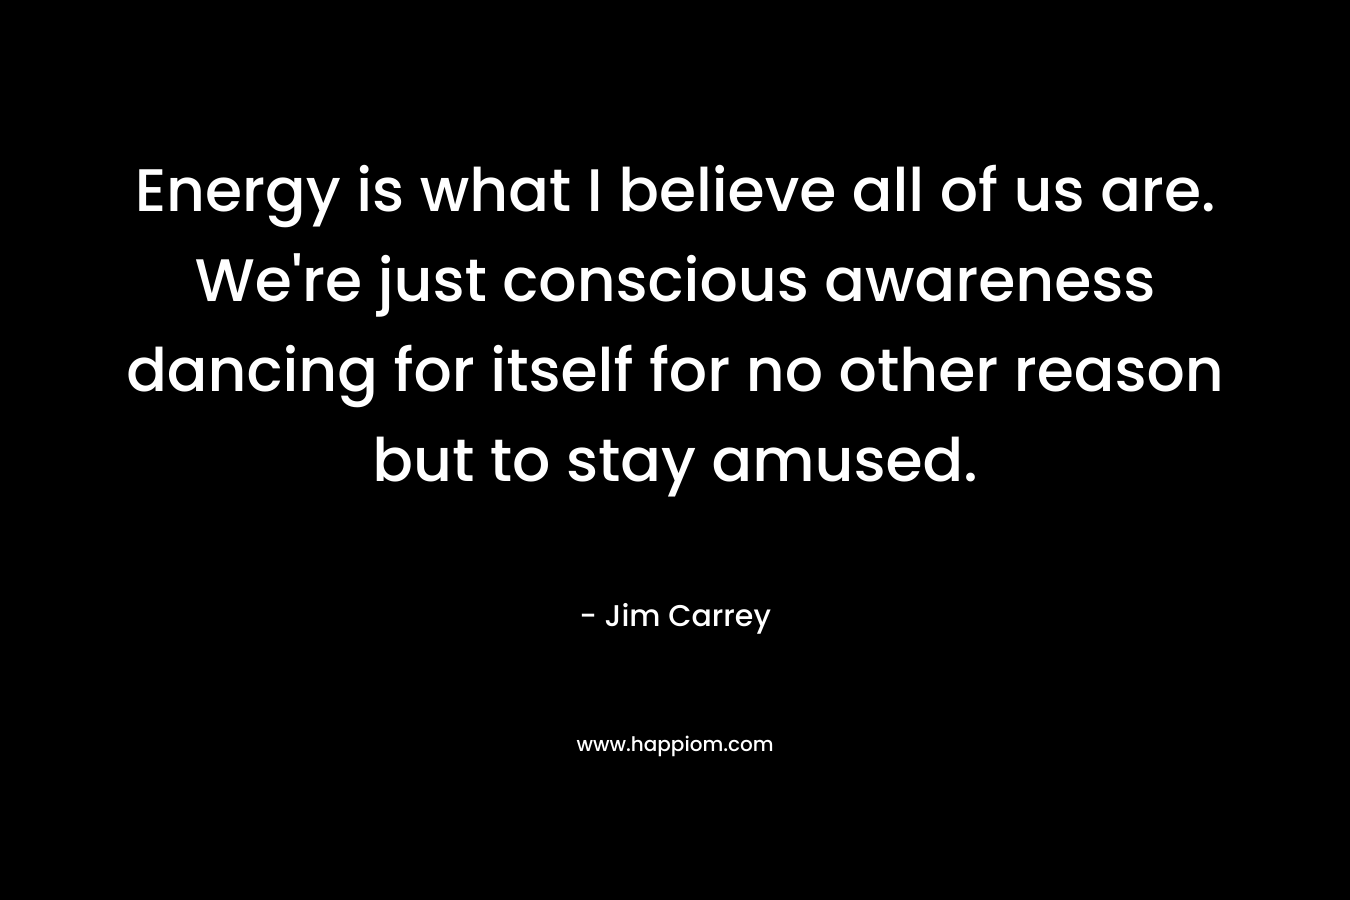 Energy is what I believe all of us are. We’re just conscious awareness dancing for itself for no other reason but to stay amused. – Jim Carrey